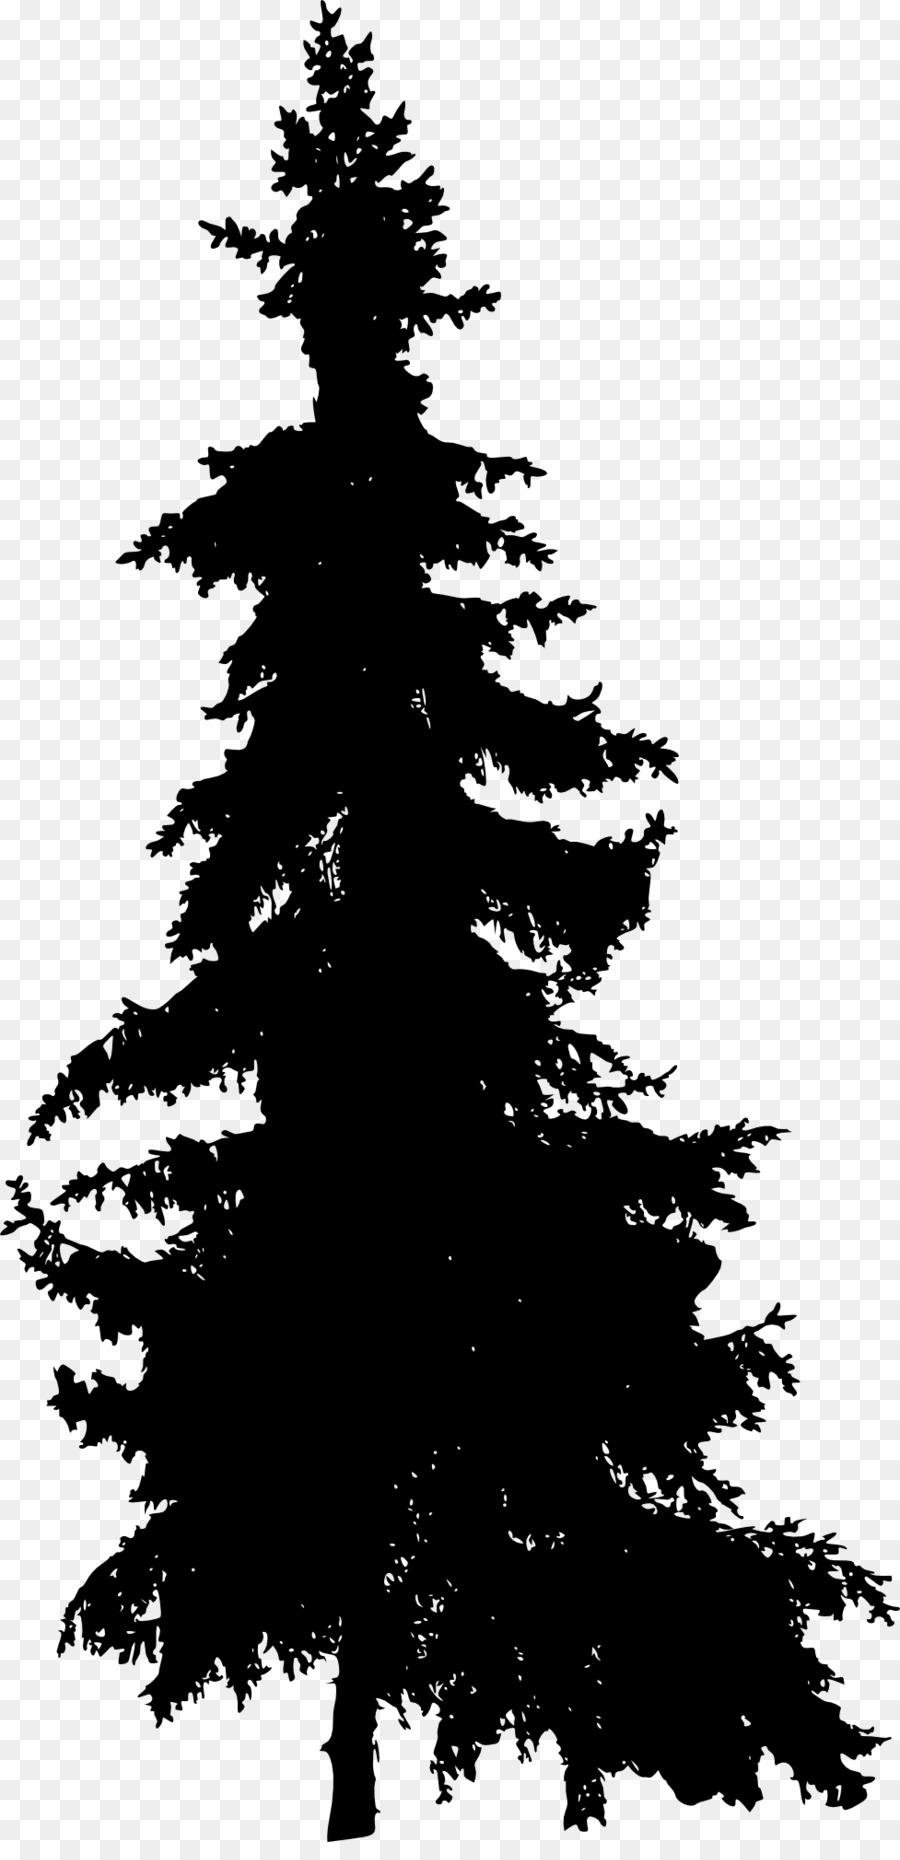 Pine Blue spruce Fir Tree - pine tree png download - 977*2000 - Free Transparent Pine png Download.